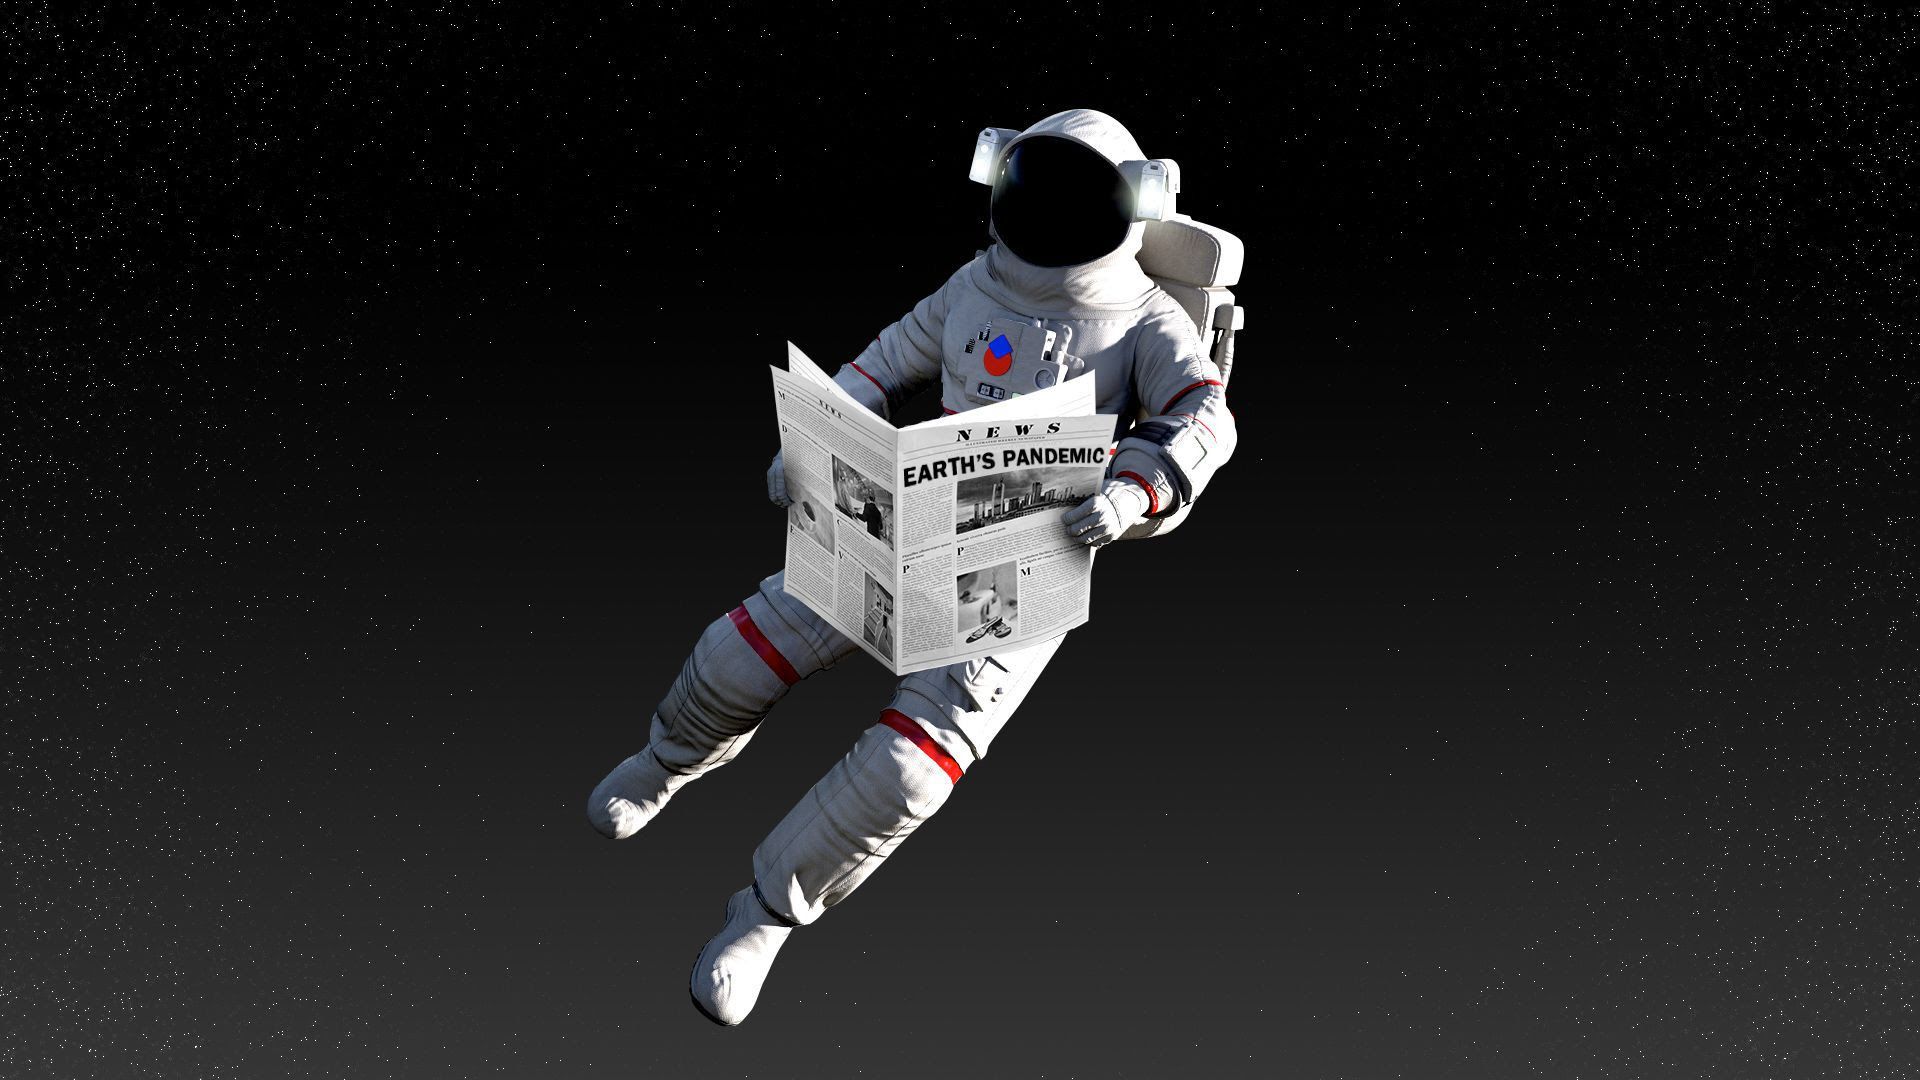 Illustration of a space man reading the newspaper in space